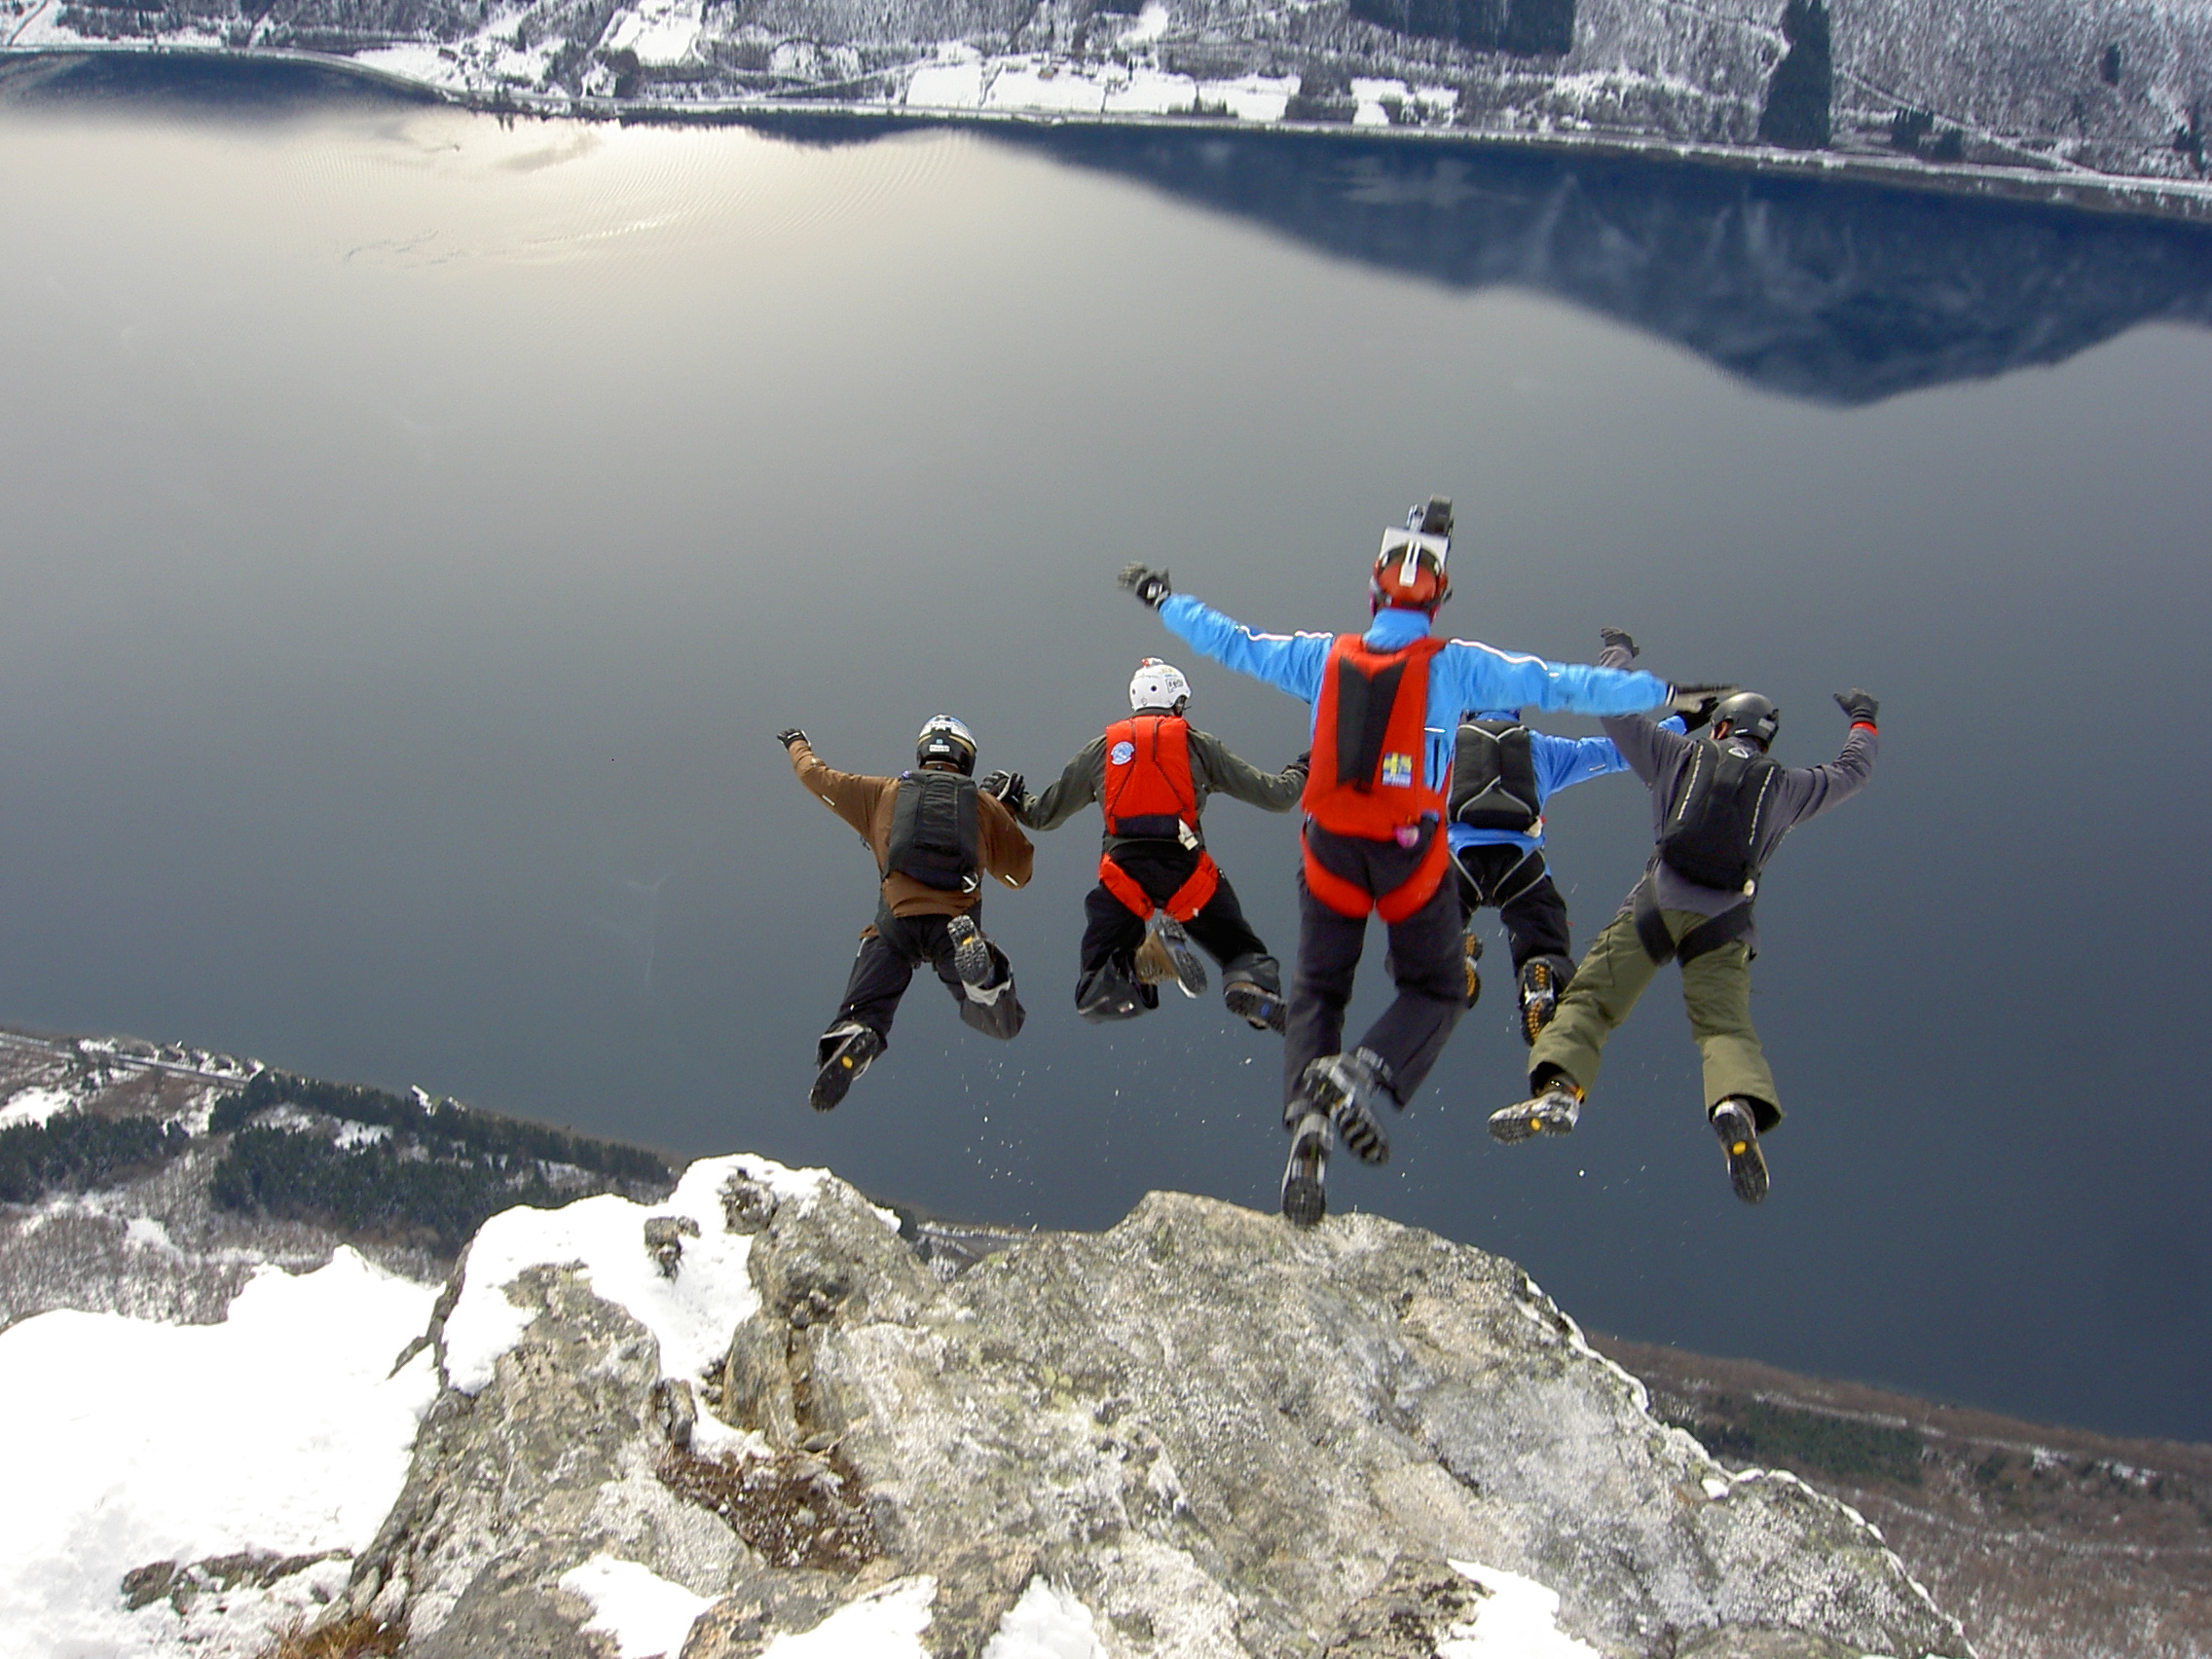 Filming BASE jumpers for a commercial in Norway